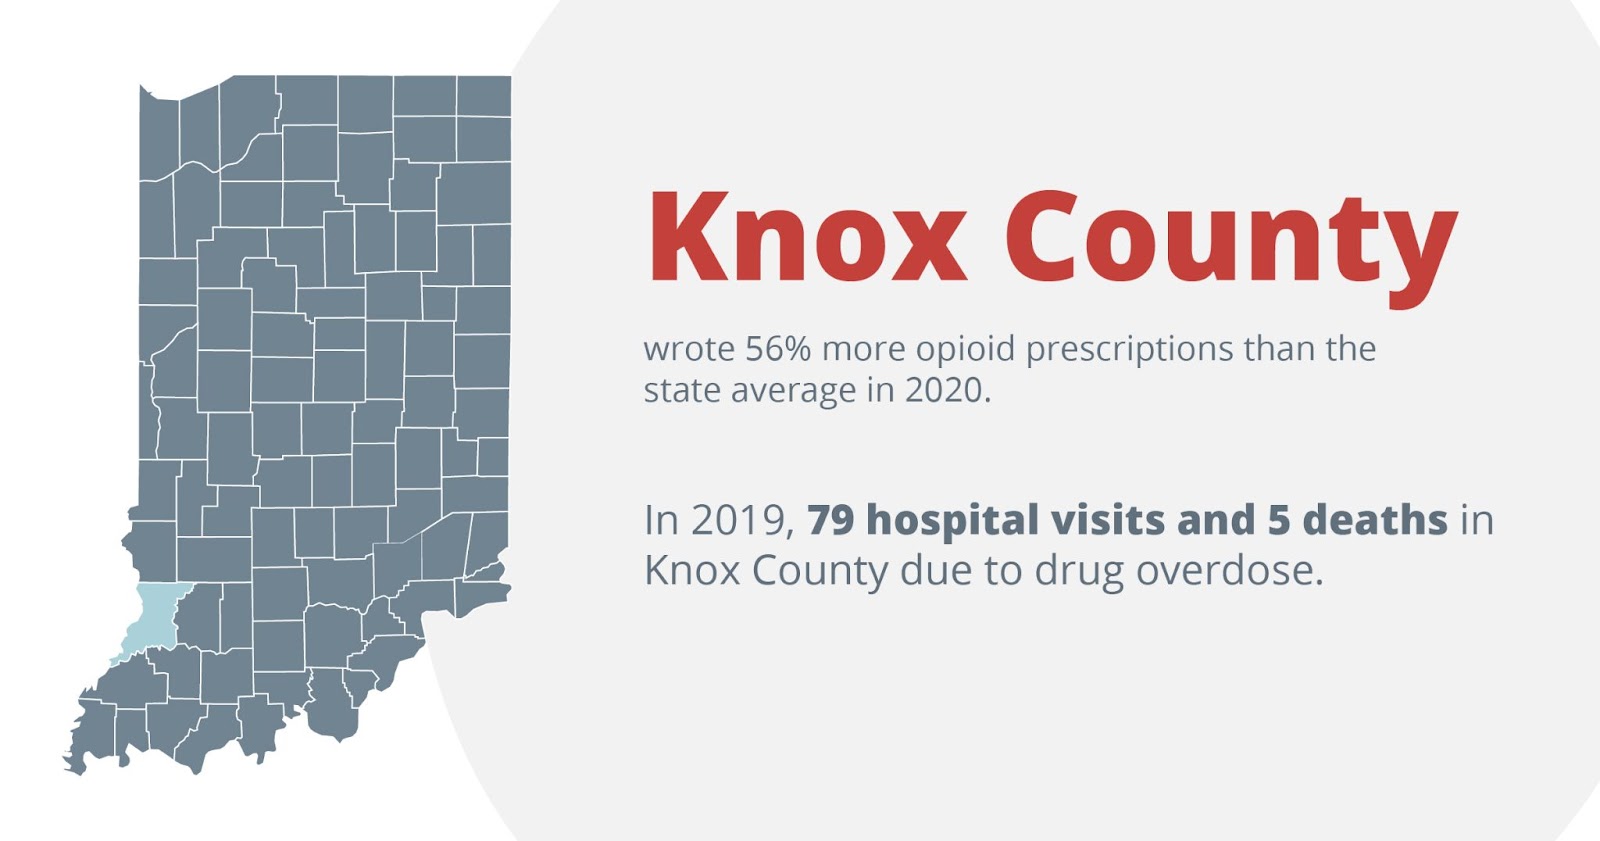 Knox county wrote 56% more opioid prescriptions than the state average in 2020. In 2019, 79 hospital visits and 5 deaths in knox county due to drug overdose. Drug and Alcohol Detox in Vincennes, Indiana